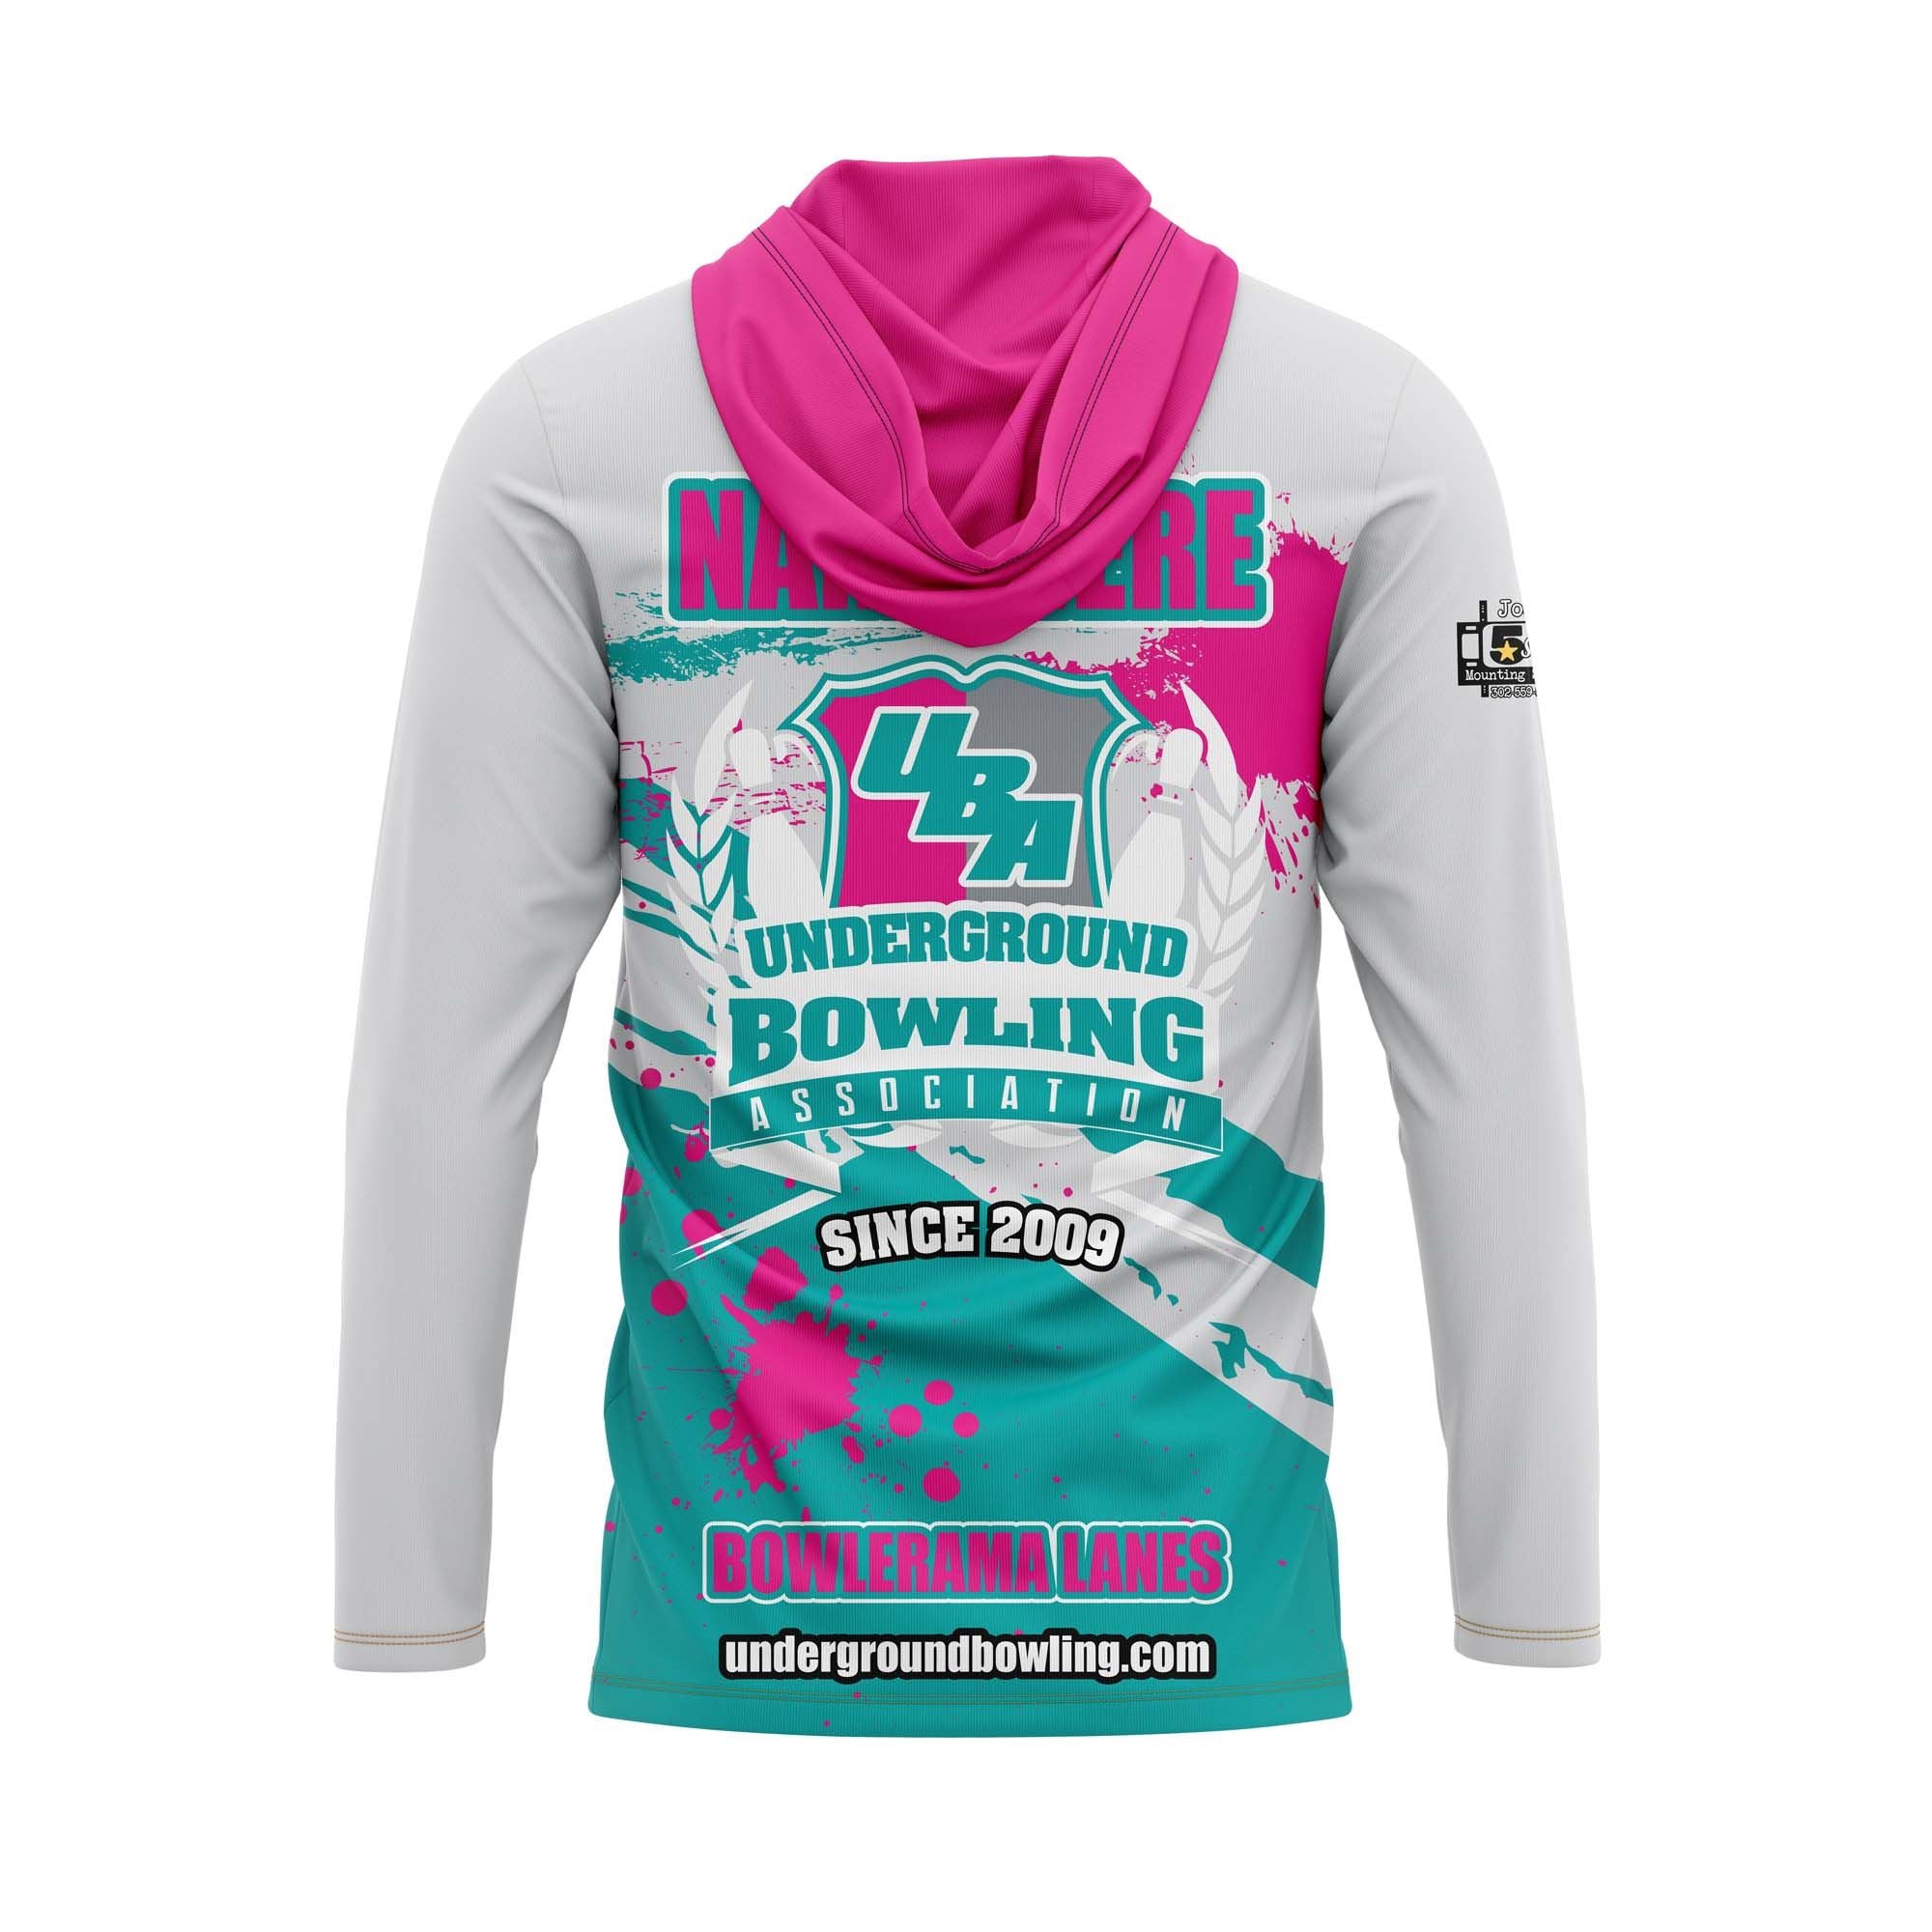 Rival Alliance Pink / Teal Jersey